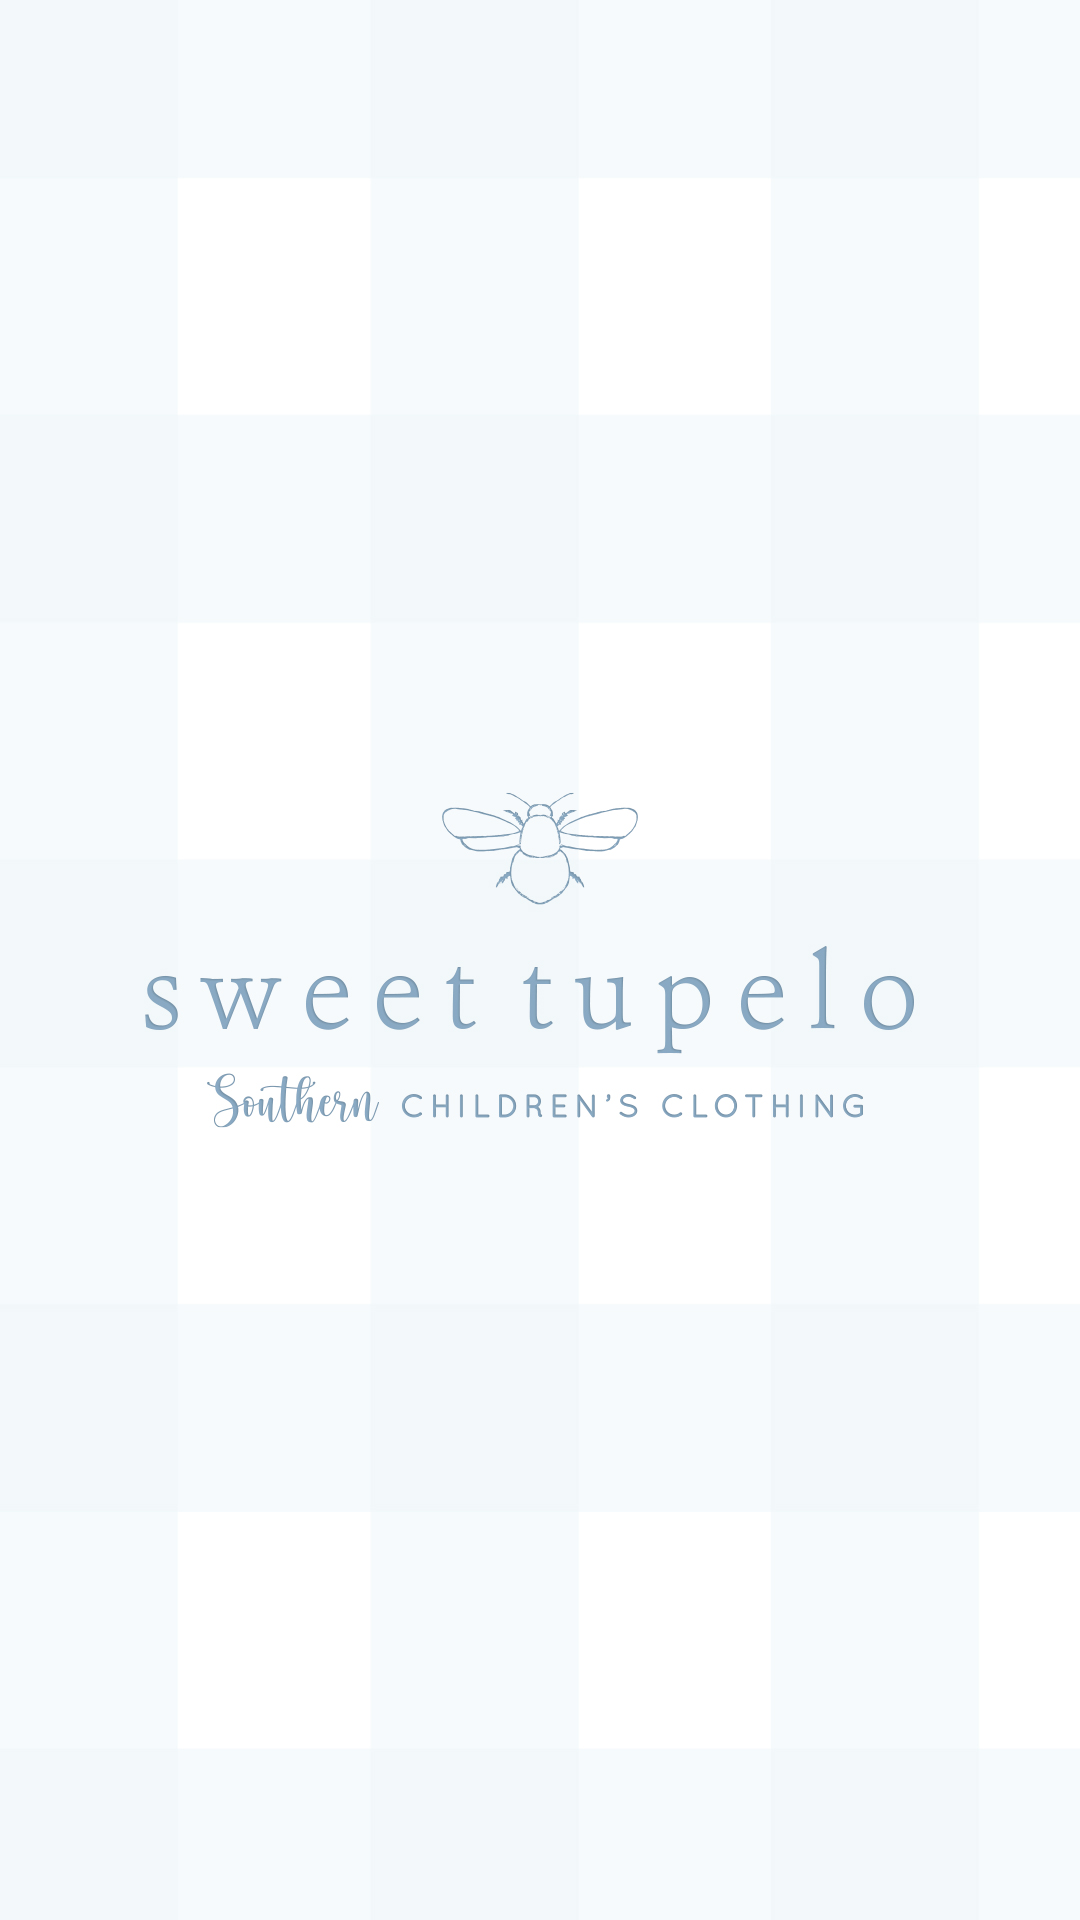 shop logo / childrens boutique branding / southern preppy branding / gingham / branding for creatives and small businesses